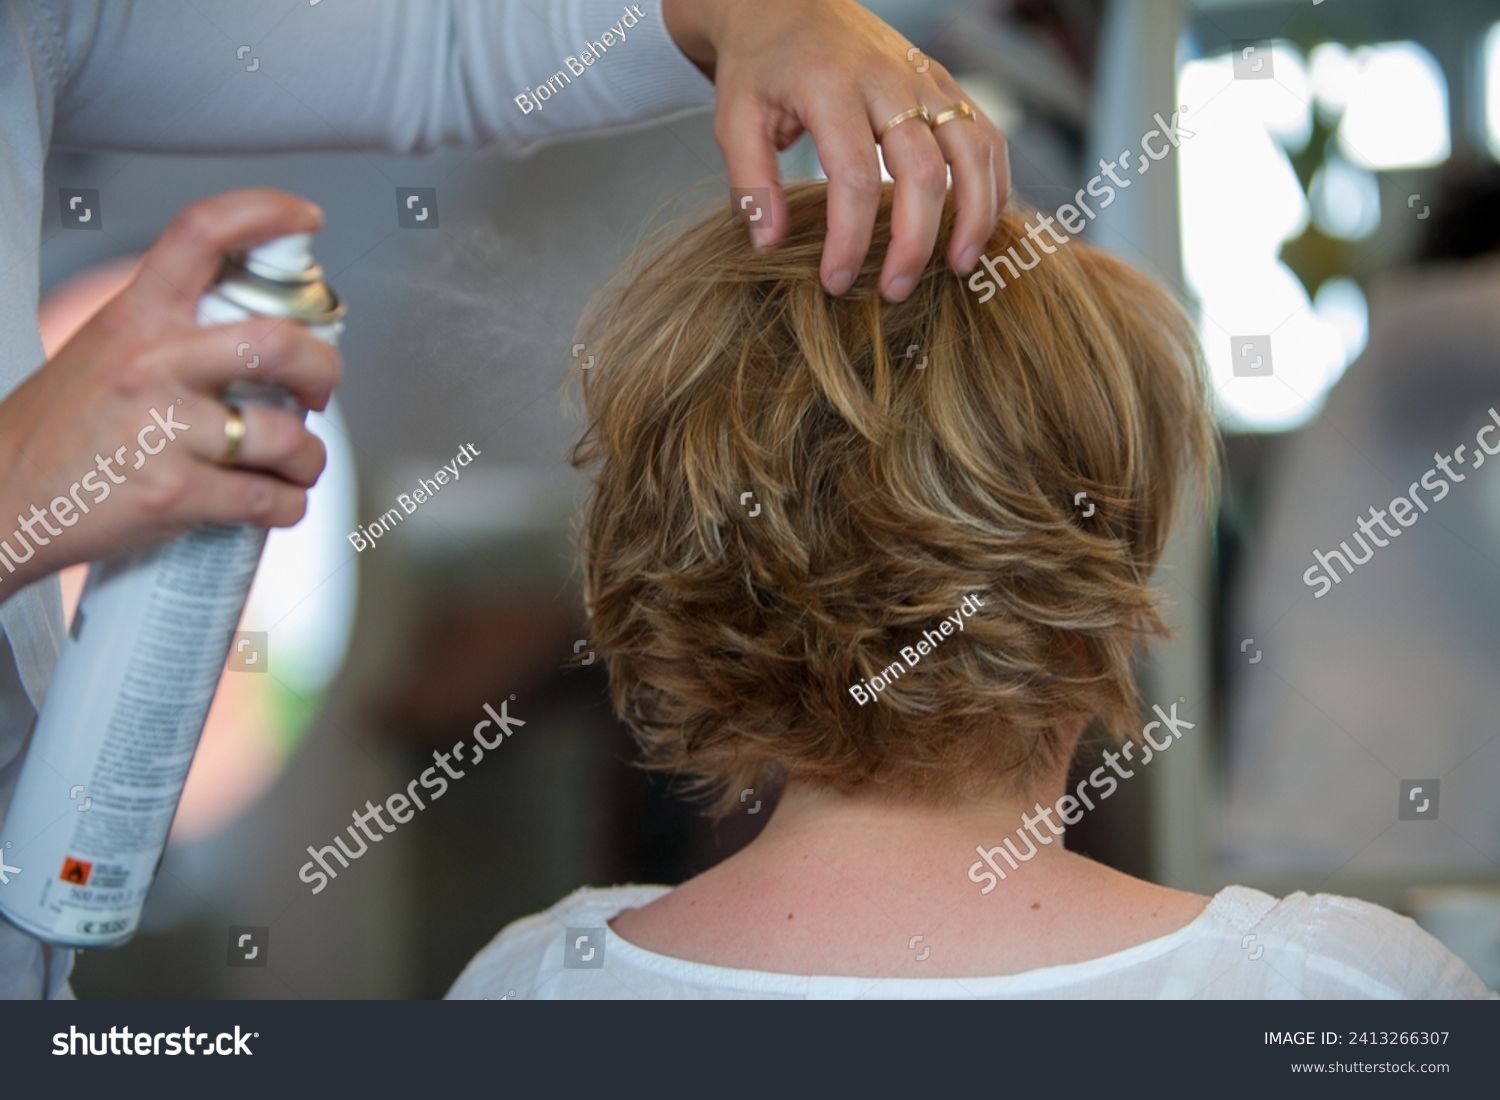 The image captures a moment of hairstyling where hands gently sculpt a short, layered haircut while applying hairspray to set the style in place. The hairstylist's hands are adorned with a wedding #2413266307